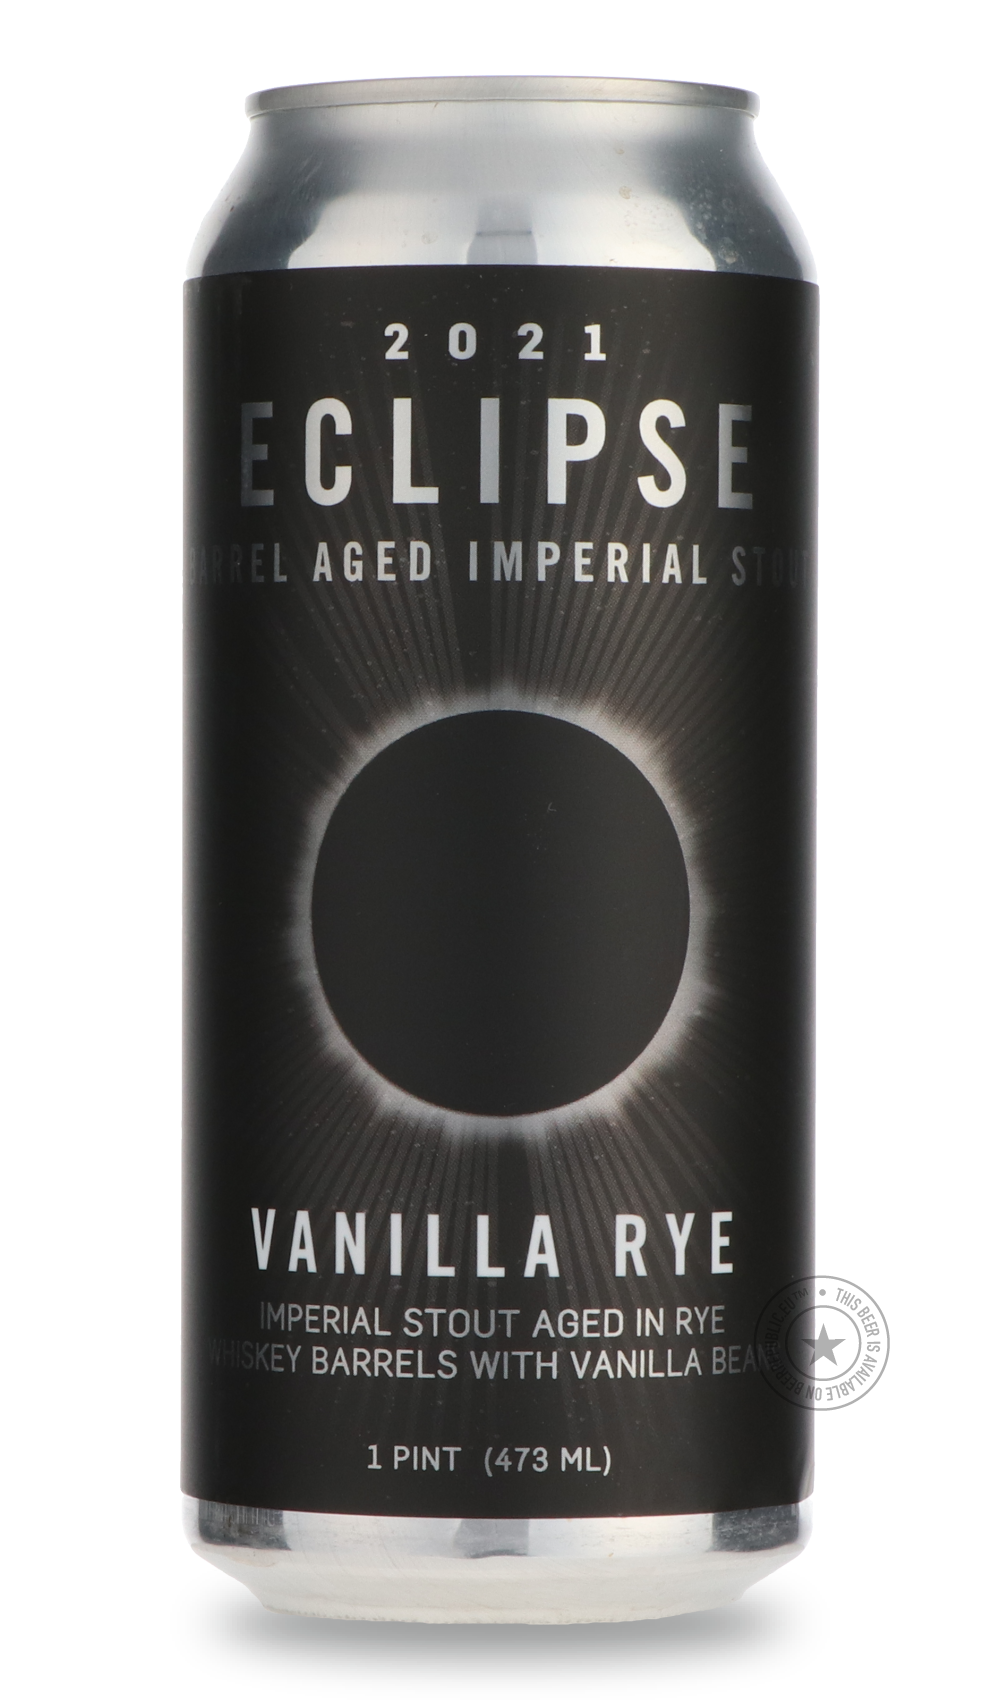 -FiftyFifty- Eclipse Vanilla Rye-Stout & Porter- Only @ Beer Republic - The best online beer store for American & Canadian craft beer - Buy beer online from the USA and Canada - Bier online kopen - Amerikaans bier kopen - Craft beer store - Craft beer kopen - Amerikanisch bier kaufen - Bier online kaufen - Acheter biere online - IPA - Stout - Porter - New England IPA - Hazy IPA - Imperial Stout - Barrel Aged - Barrel Aged Imperial Stout - Brown - Dark beer - Blond - Blonde - Pilsner - Lager - Wheat - Weizen